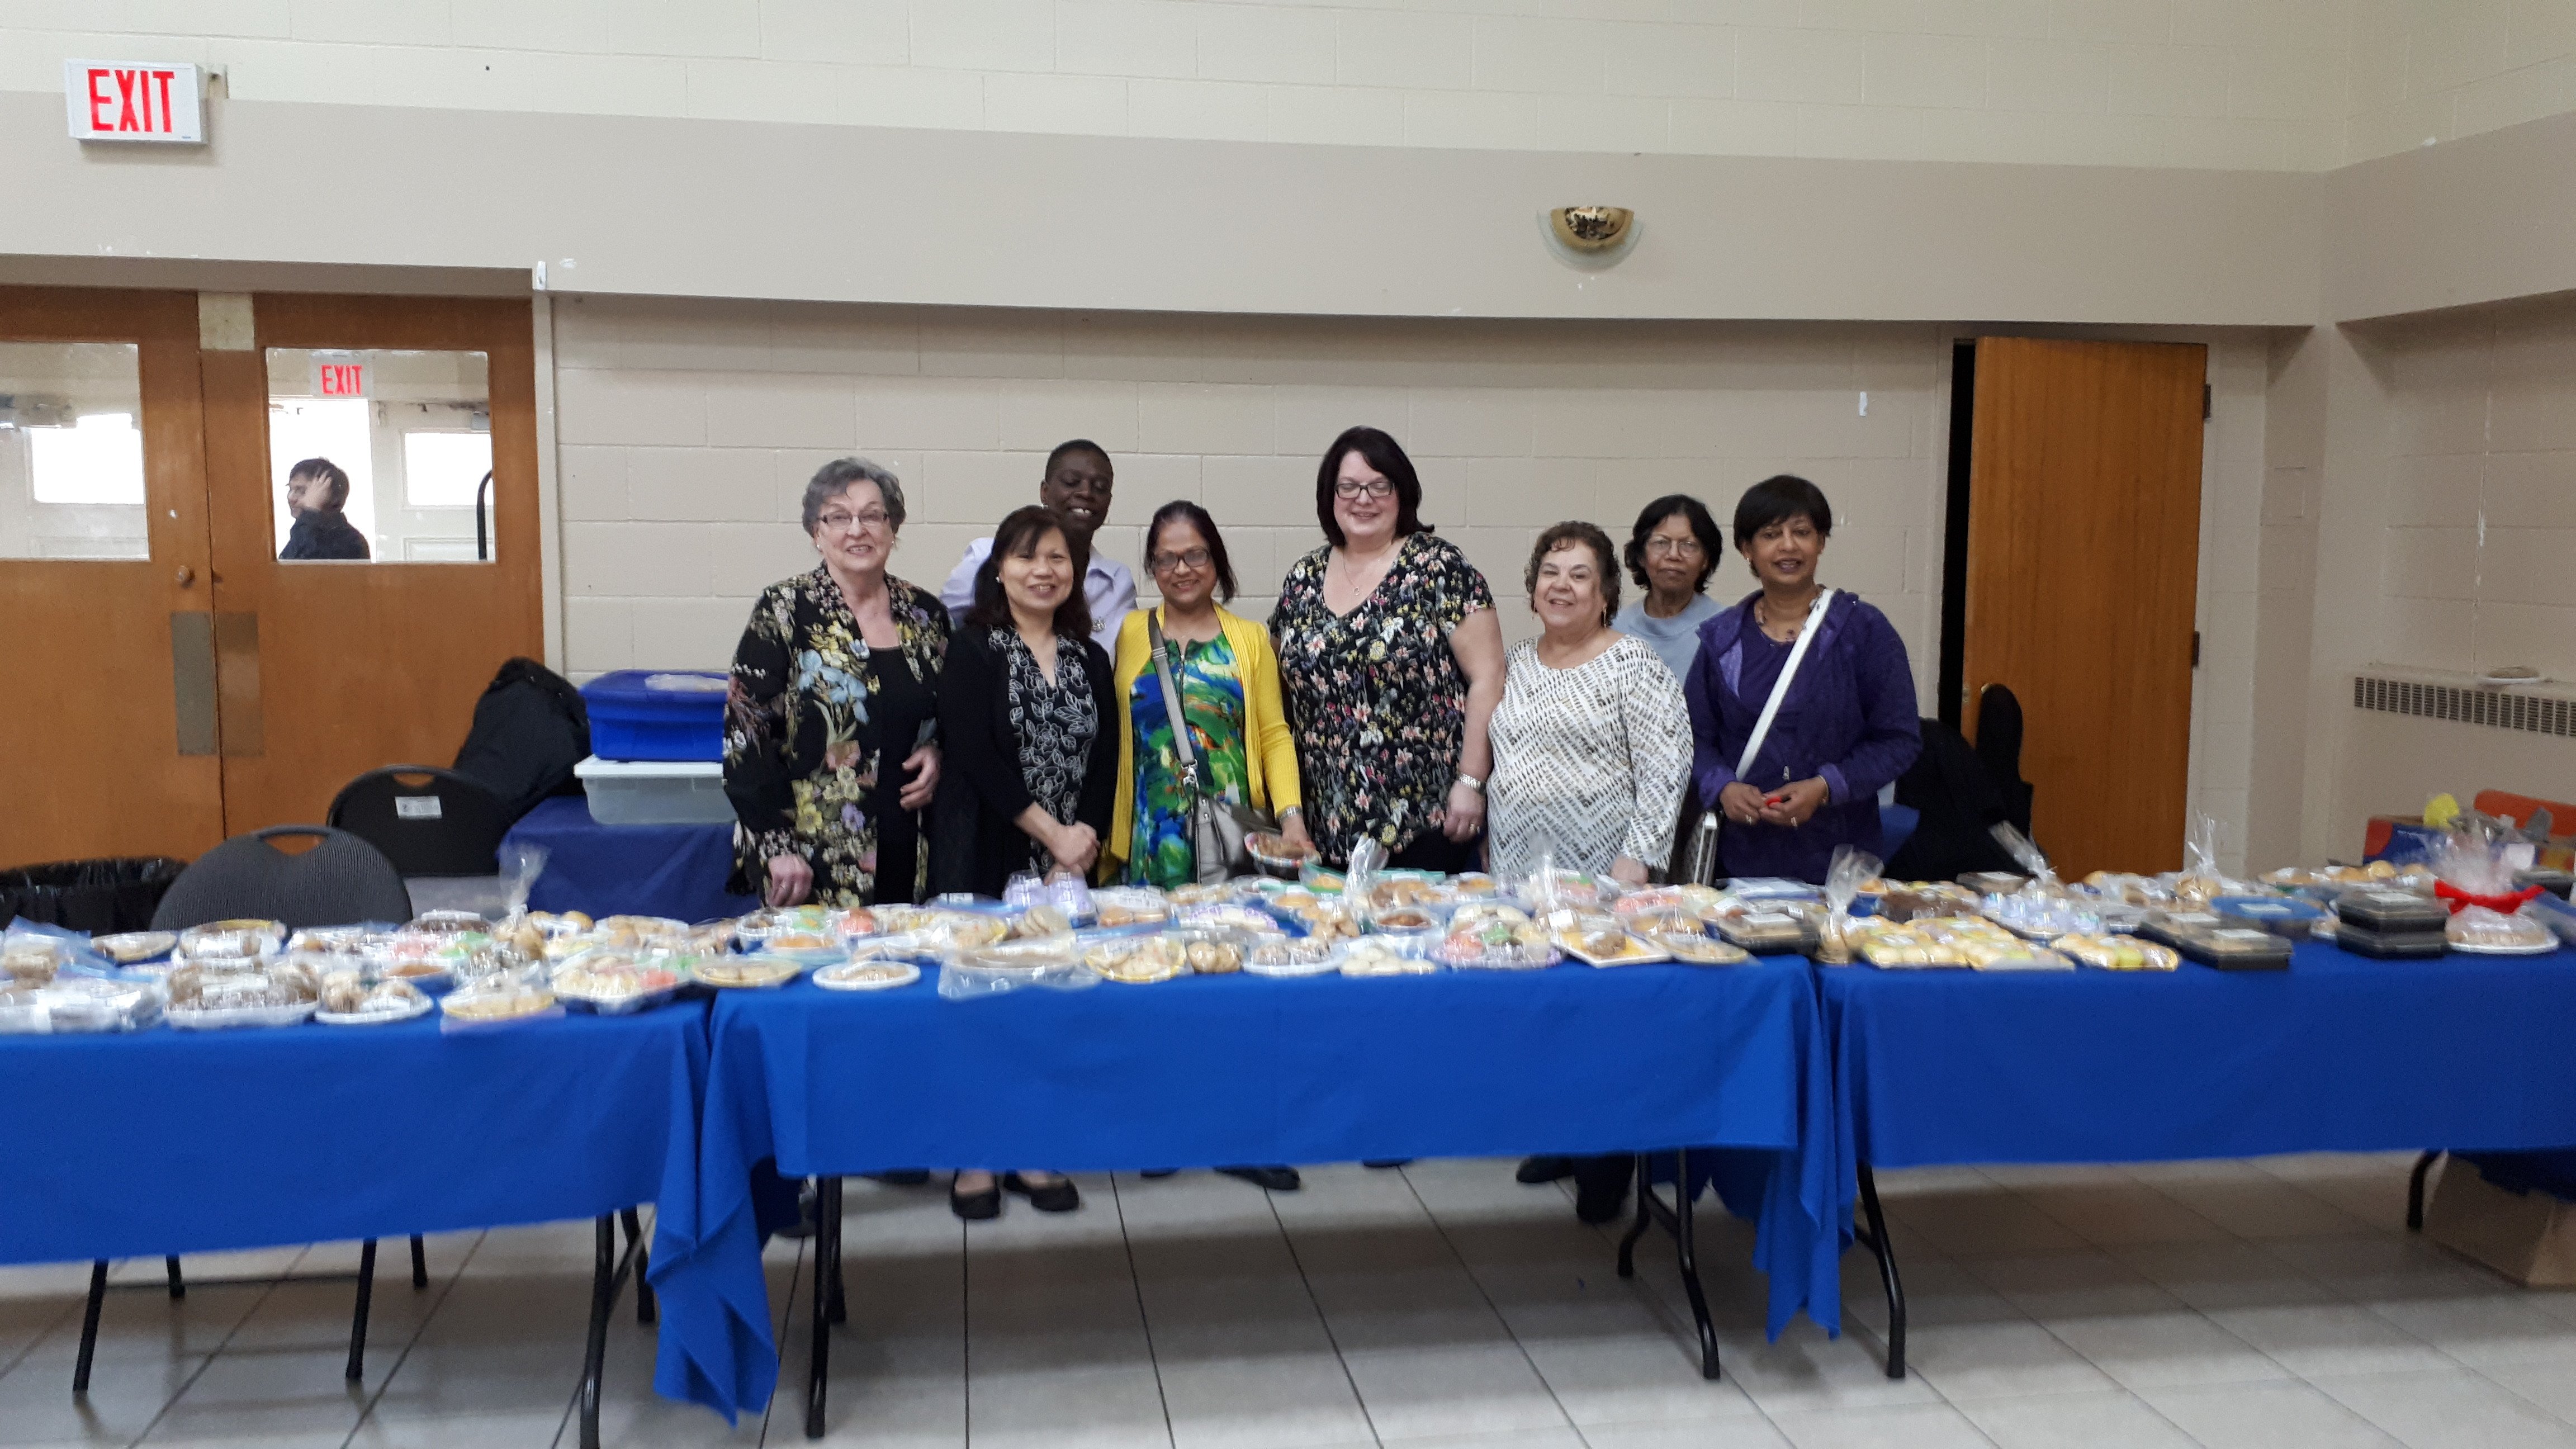 cwl members helping at the baking table